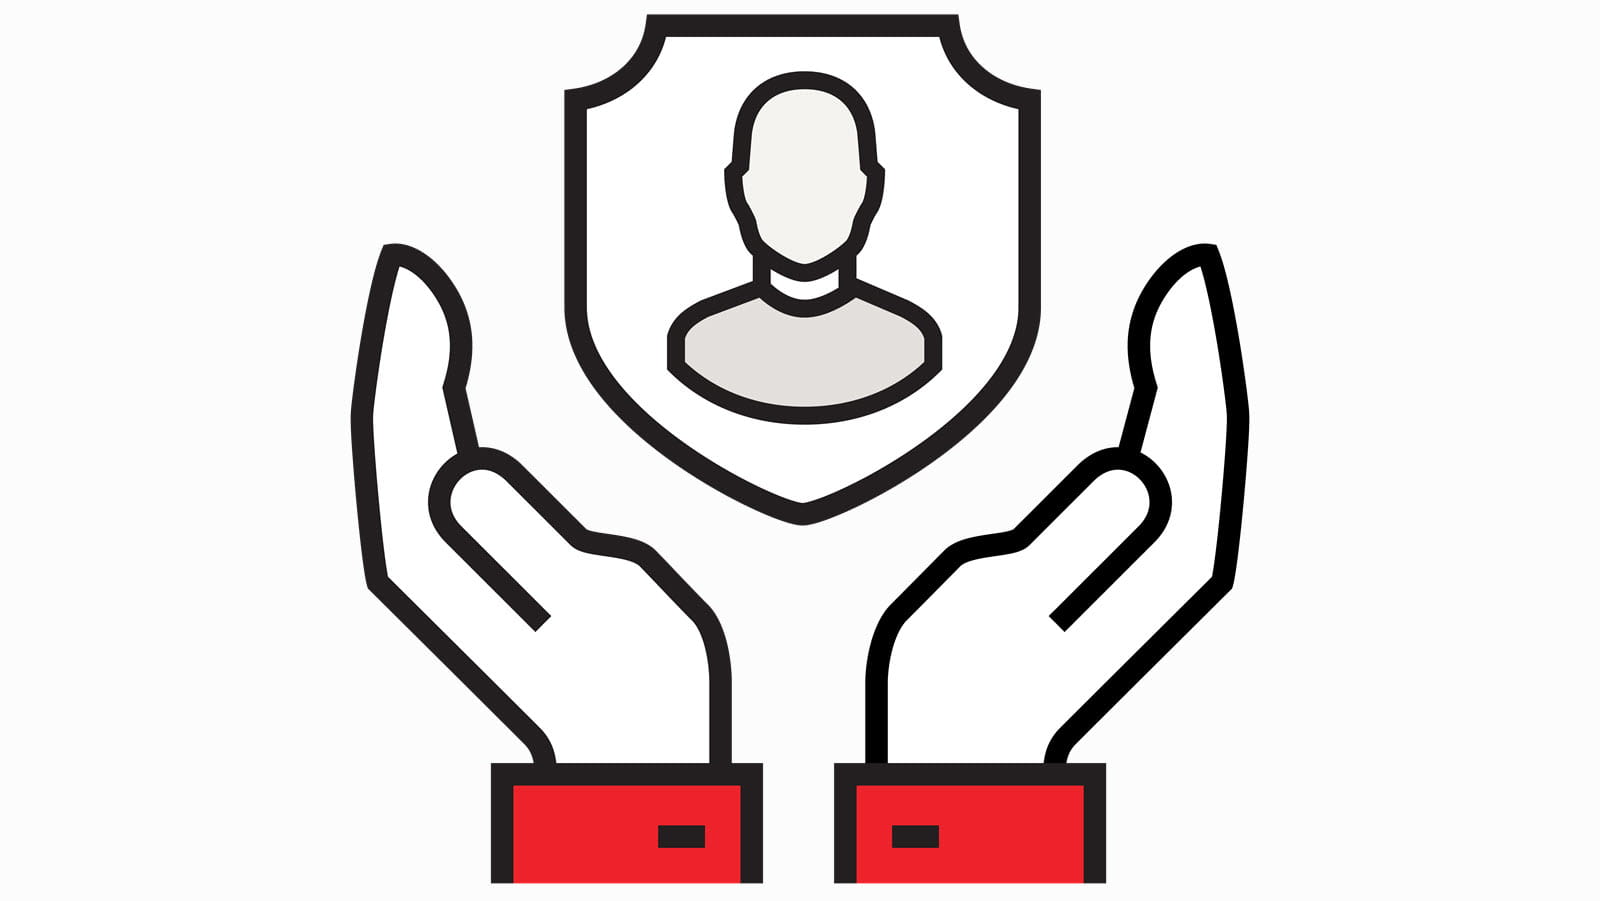 Pharmacoviglance icon showing hands protecting a patient